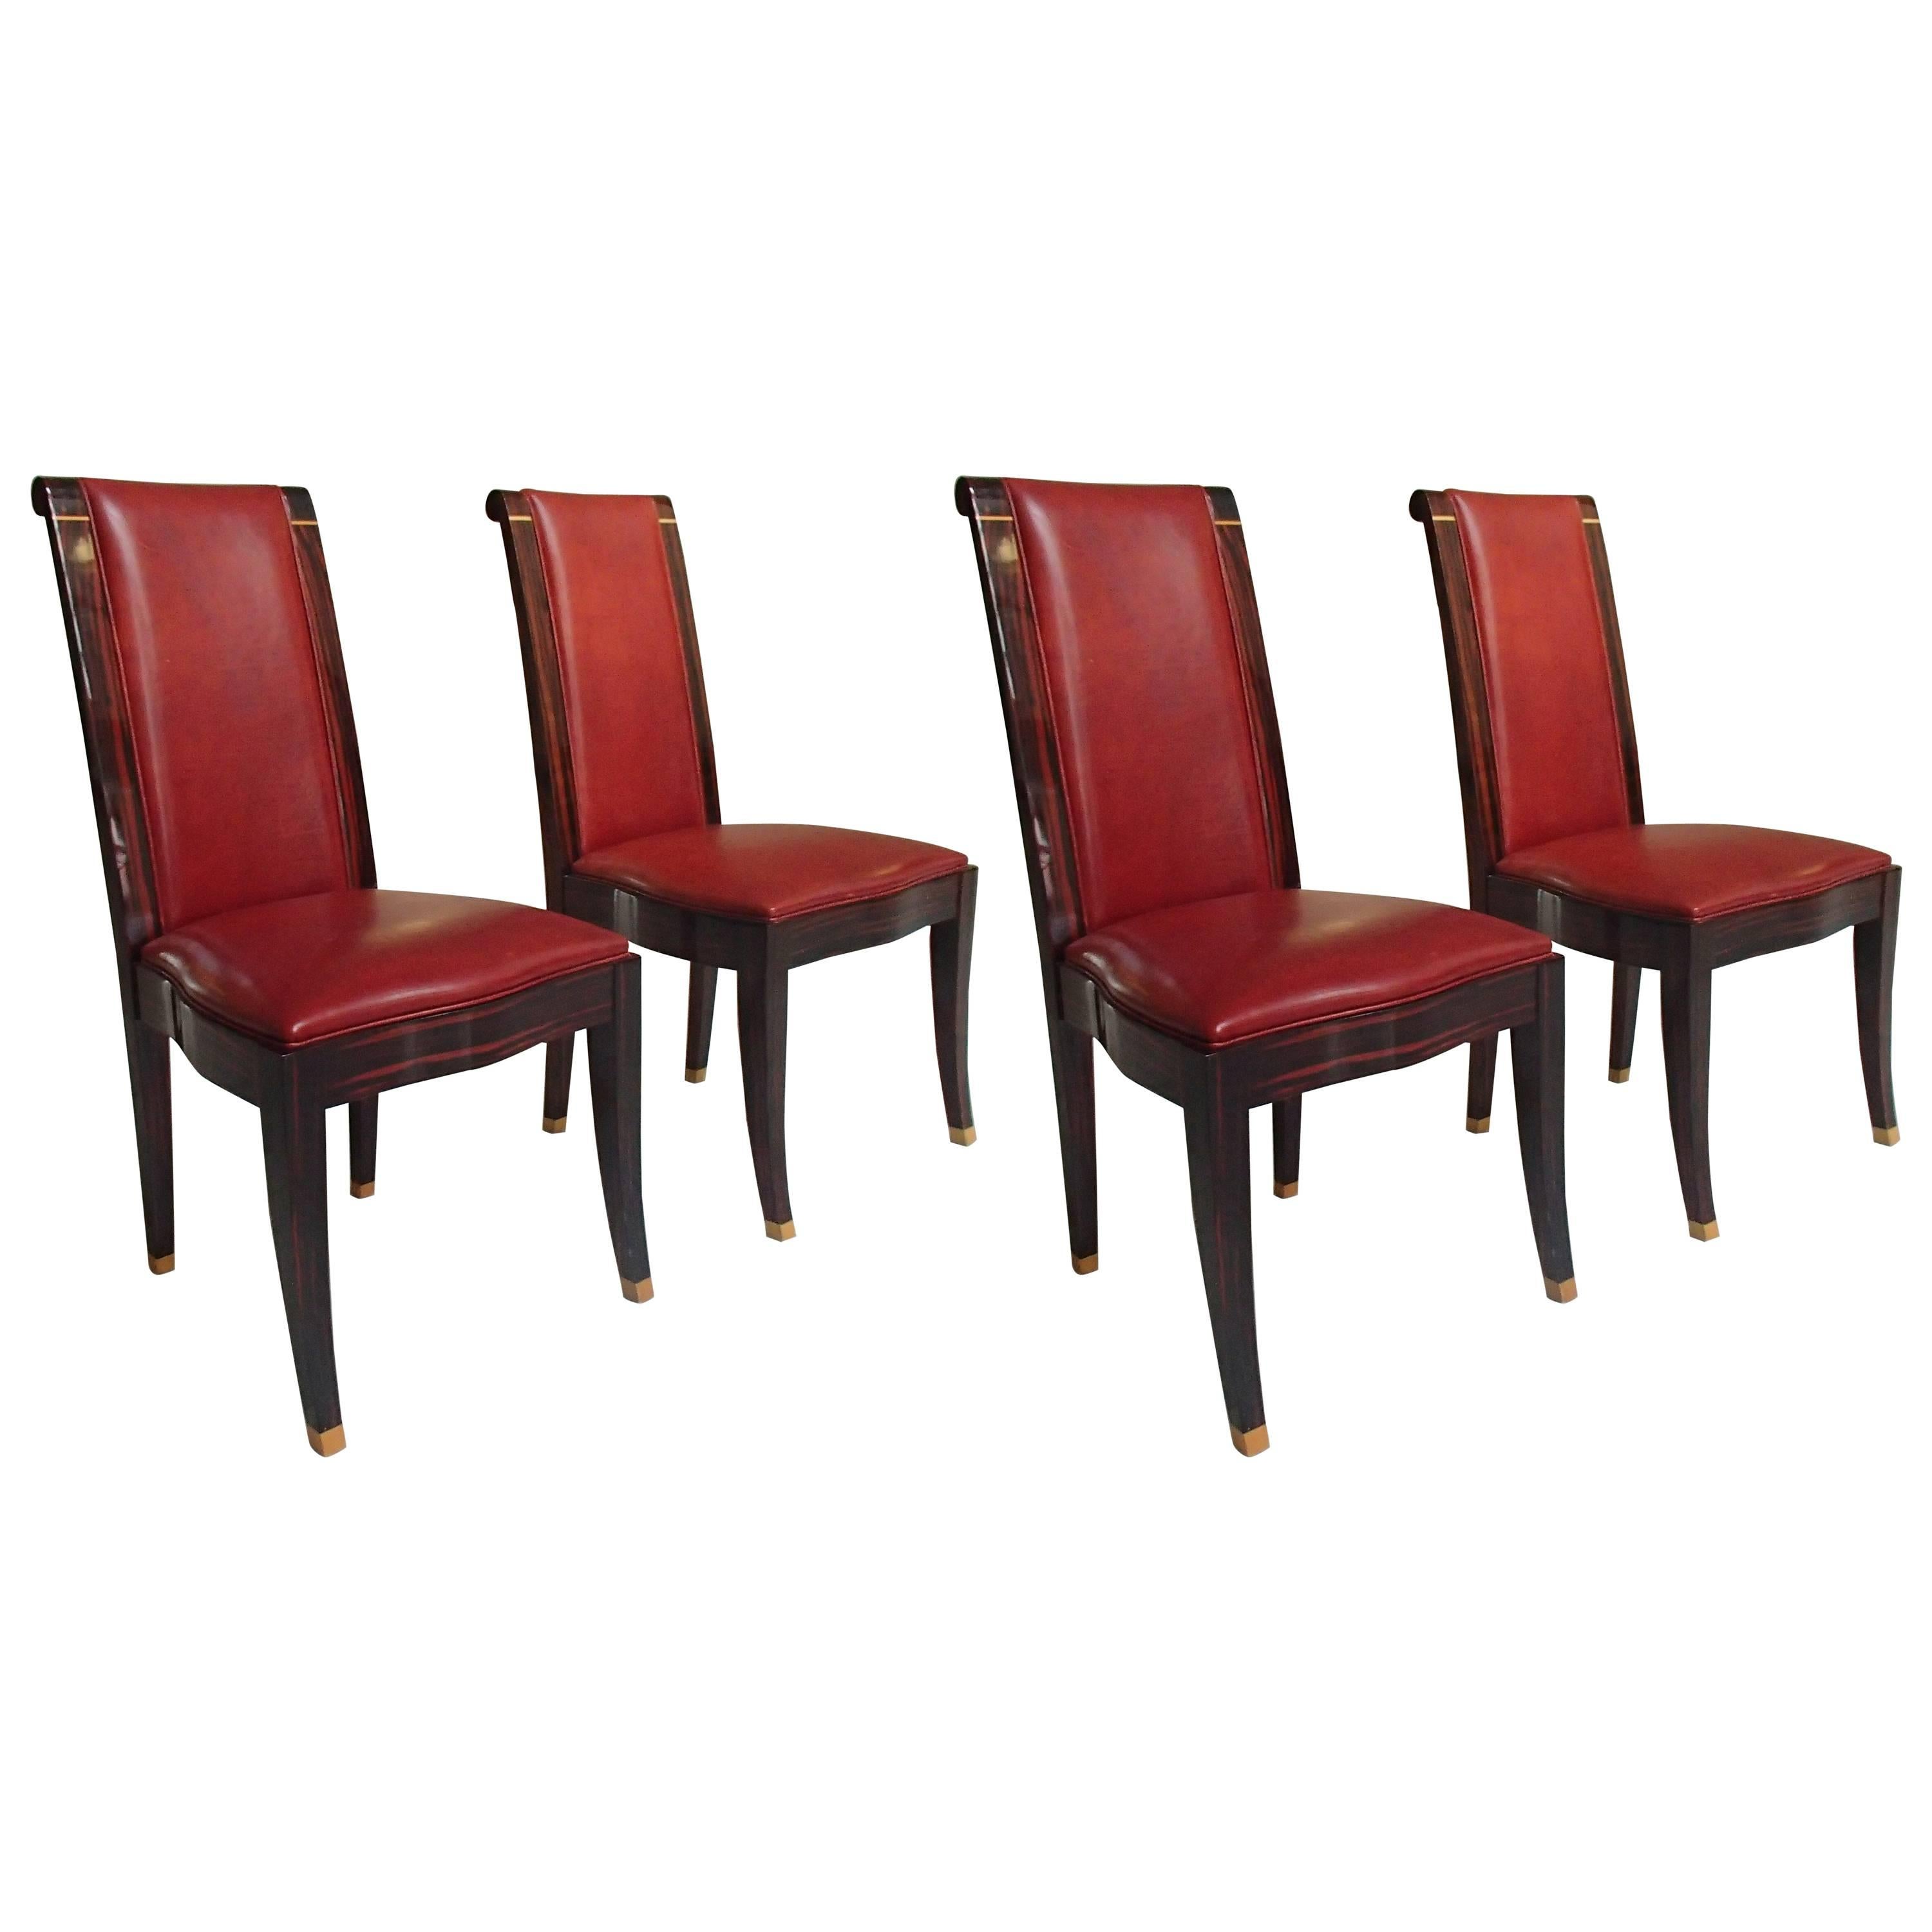 Four Art Deco Dinning Chairs Ebene de Macassar and Red Leather